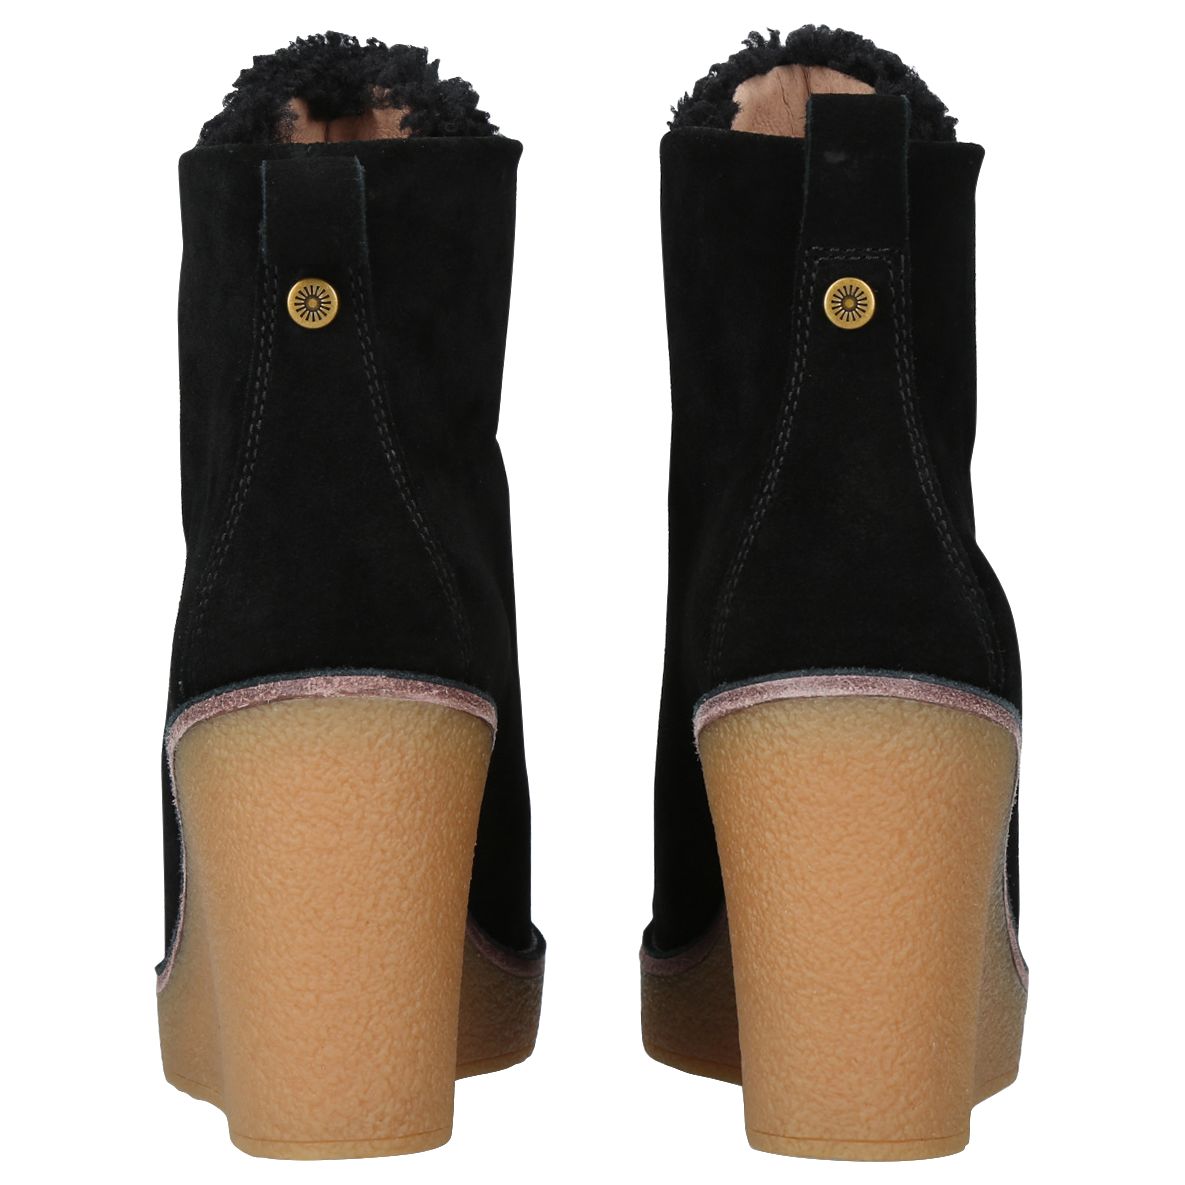 ugg ankle boots with wedge heel